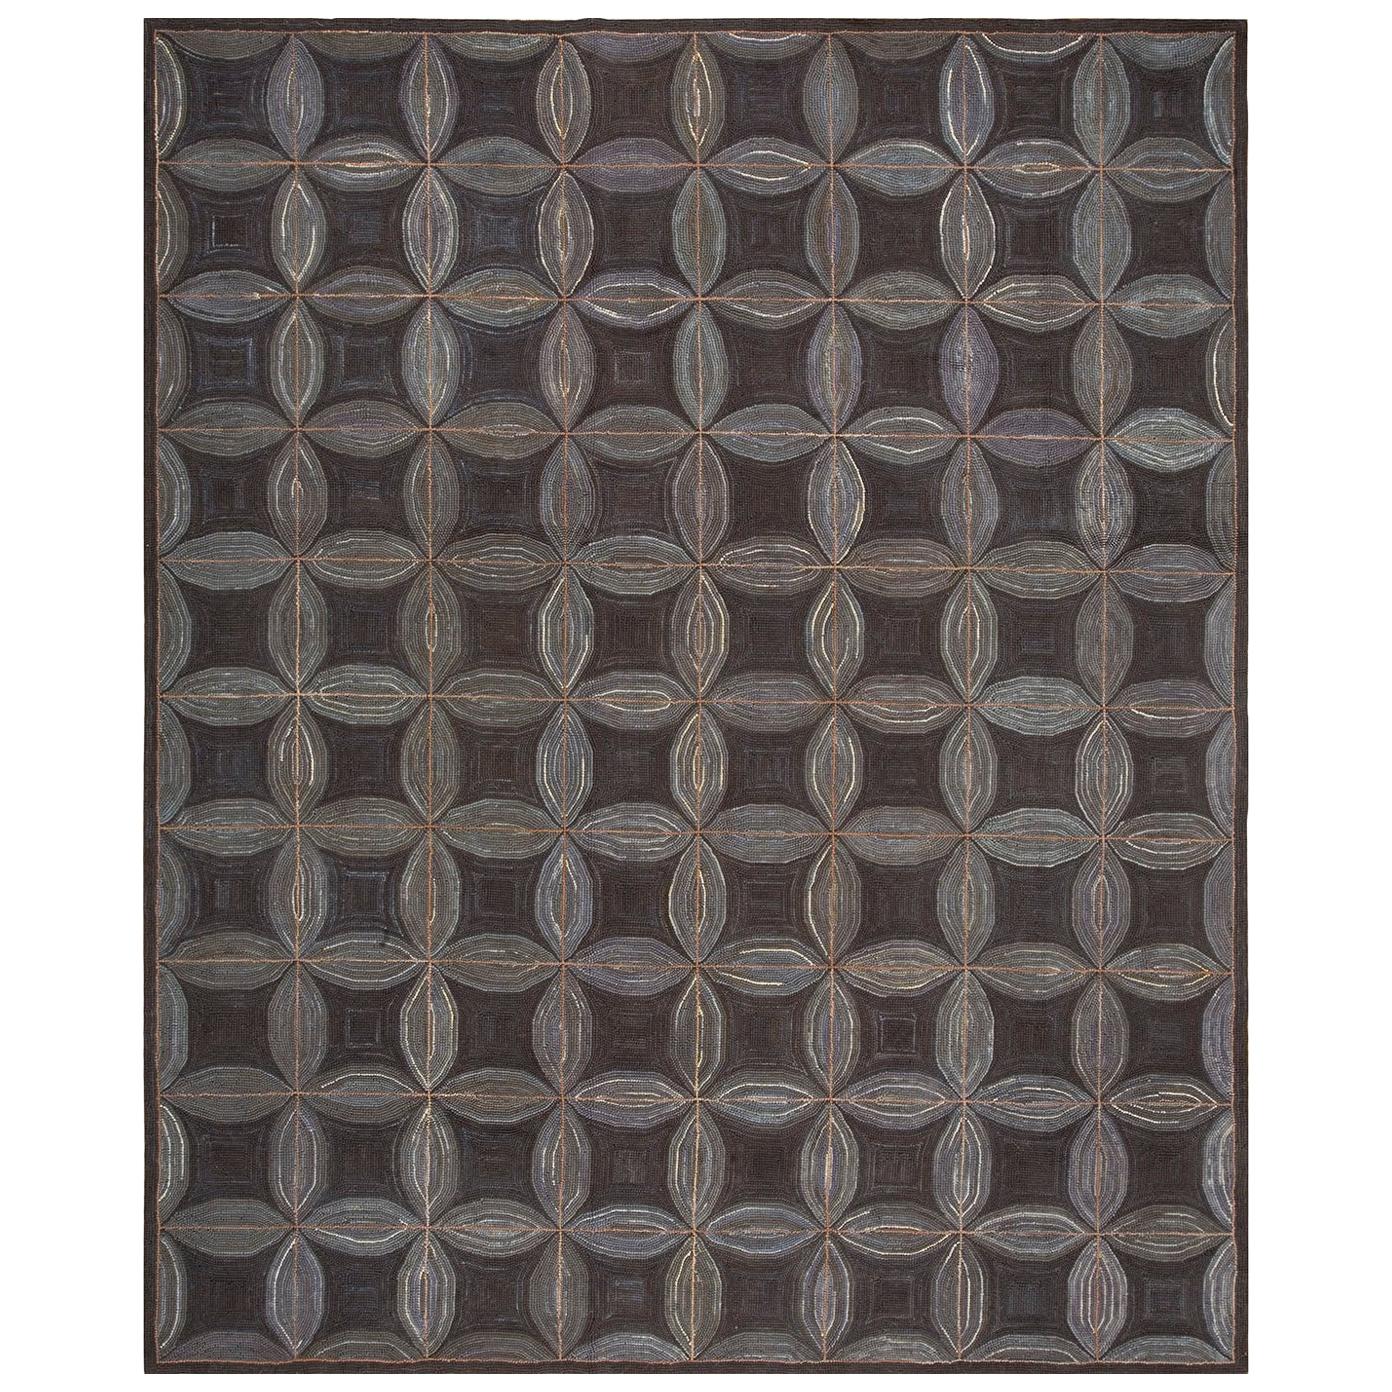 Contemporary Handmade Hooked Rug ( 9' x 12' - 275 x 365 cm ) For Sale